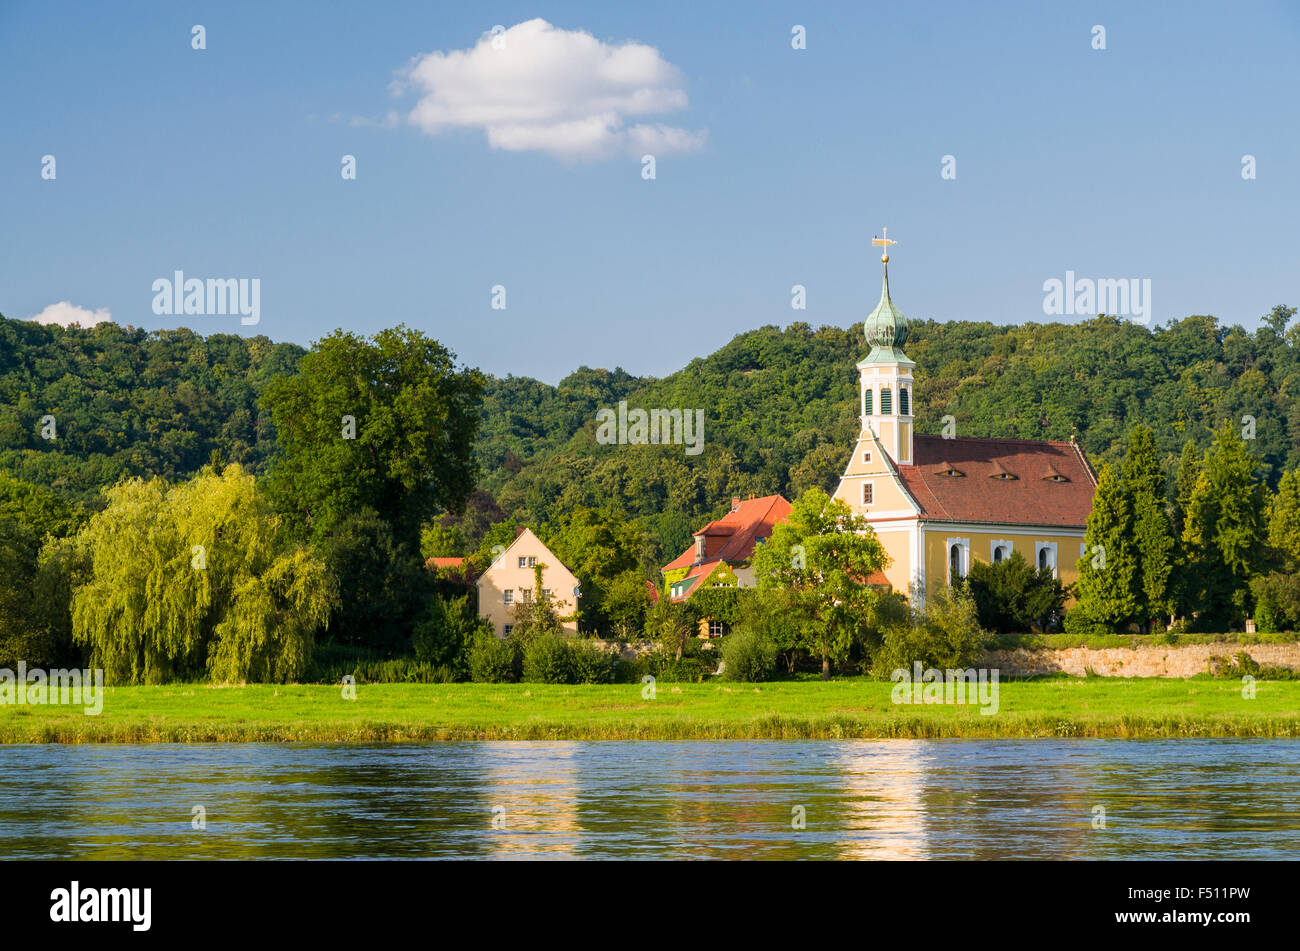 The little Chapel Maria am Wasser, situated 11 km out of the City at the river Elbe Stock Photo